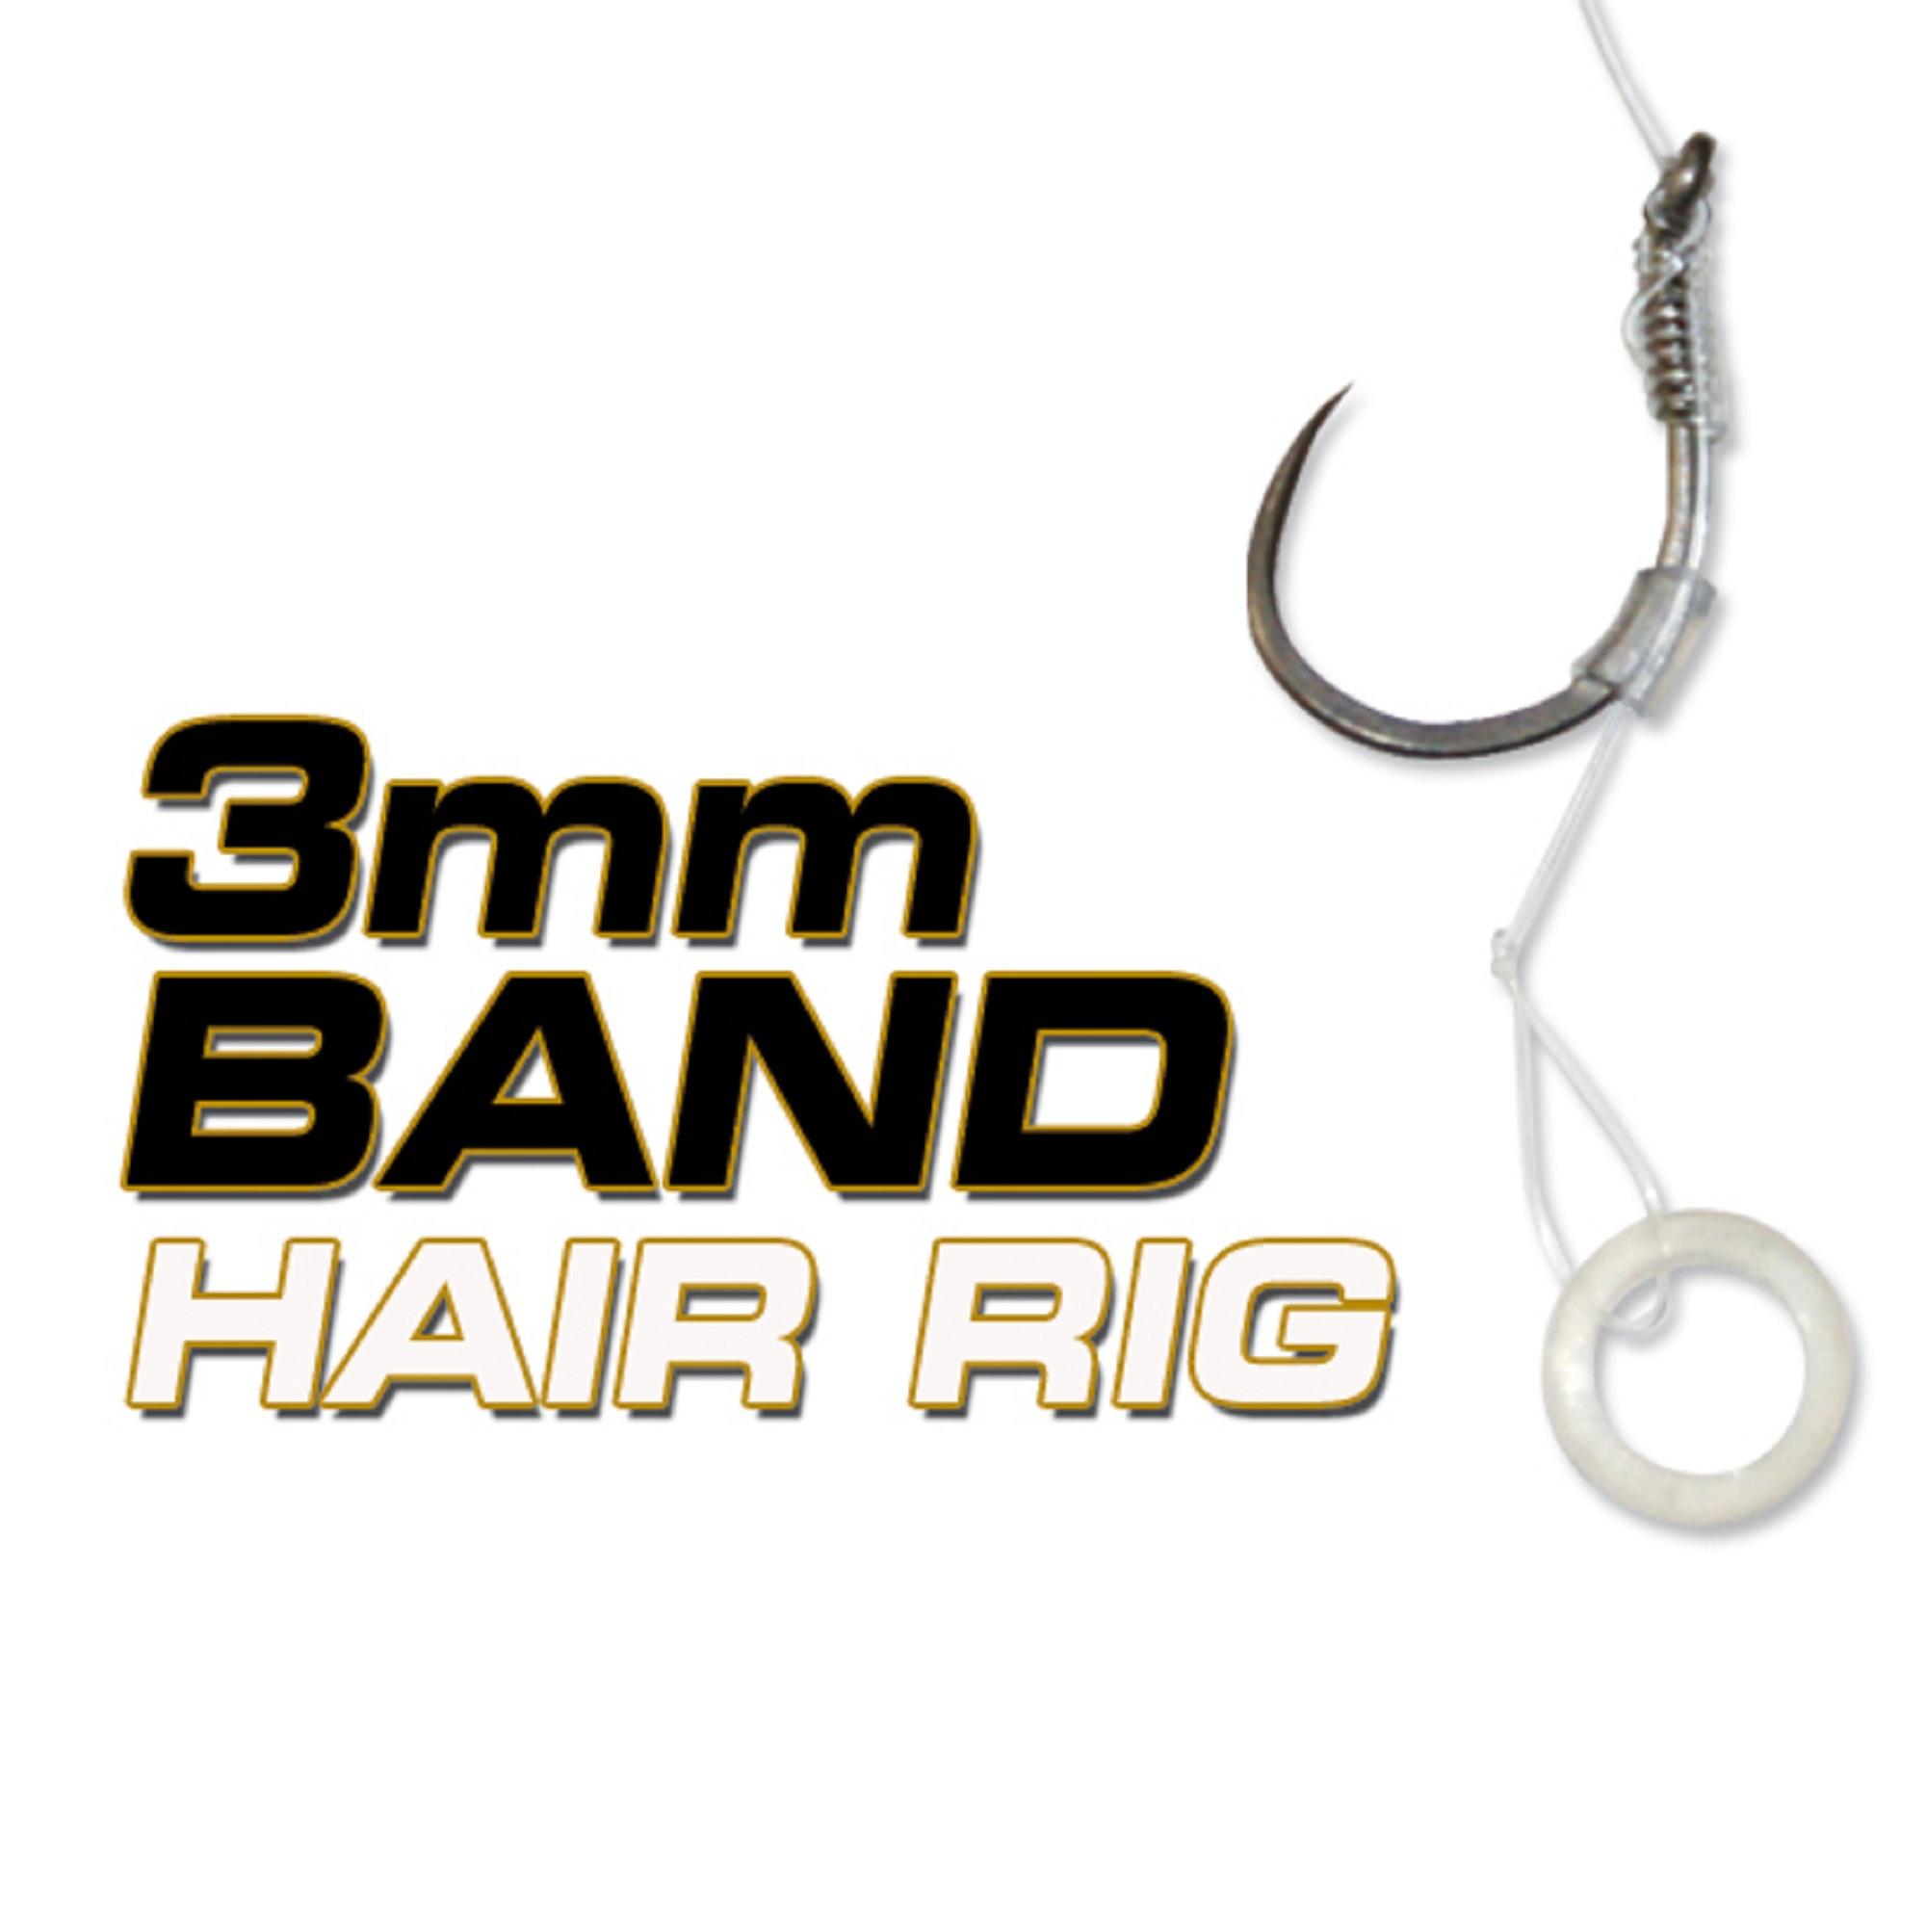 Invincible CS 24 Banded Hair Rigs 2/2